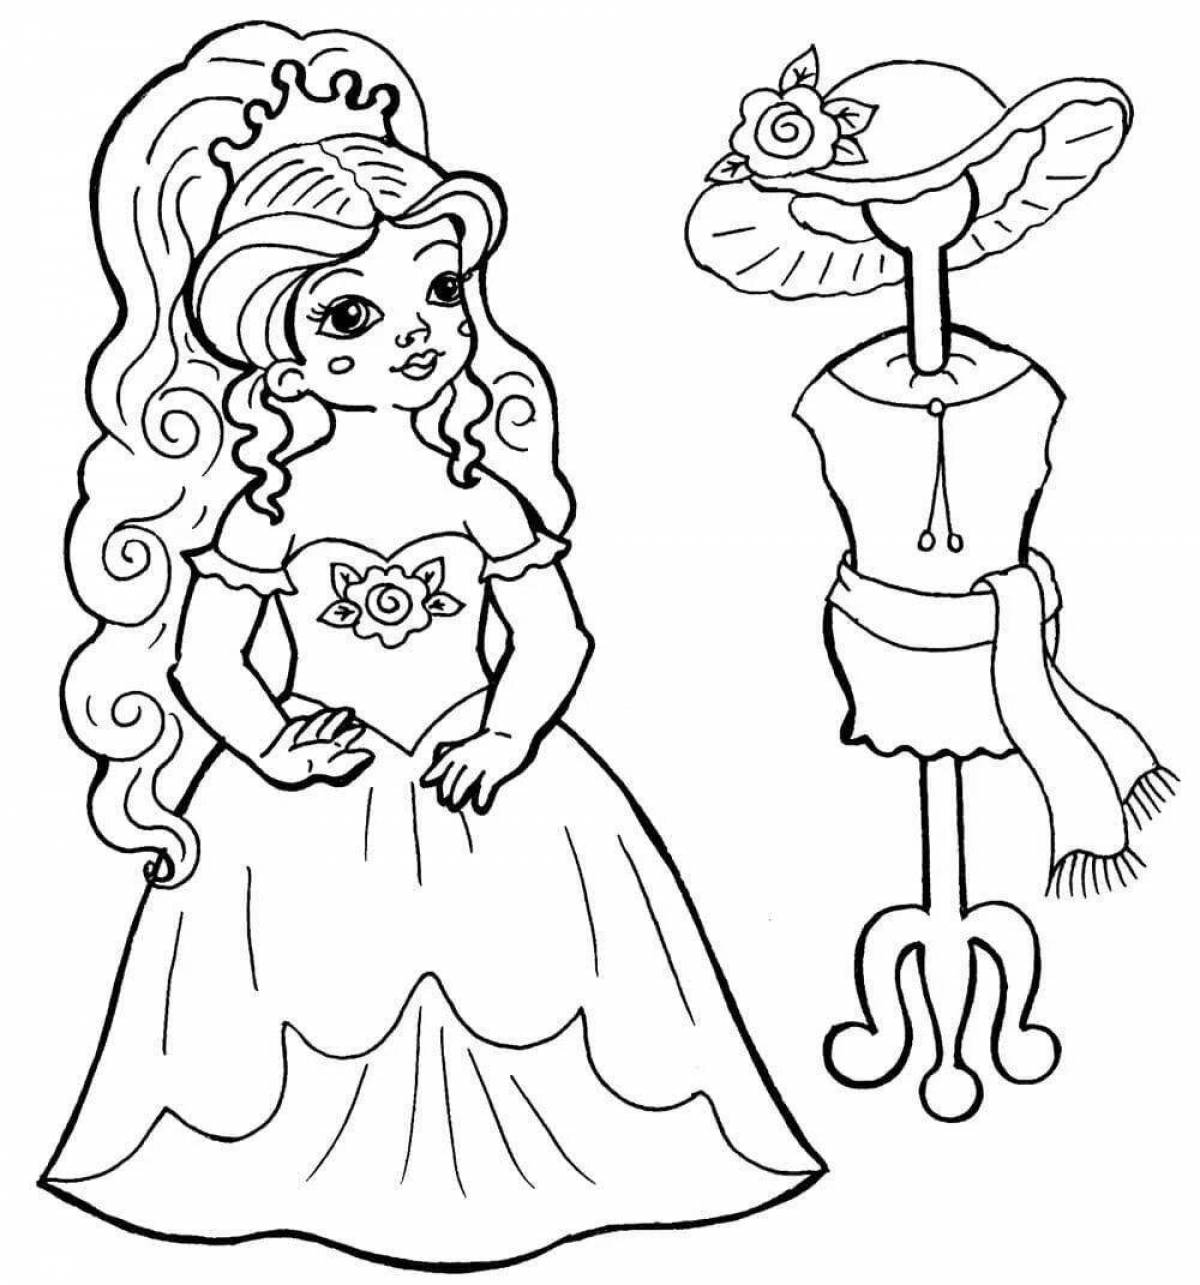 Fancy coloring book for girls princesses 5-6 years old